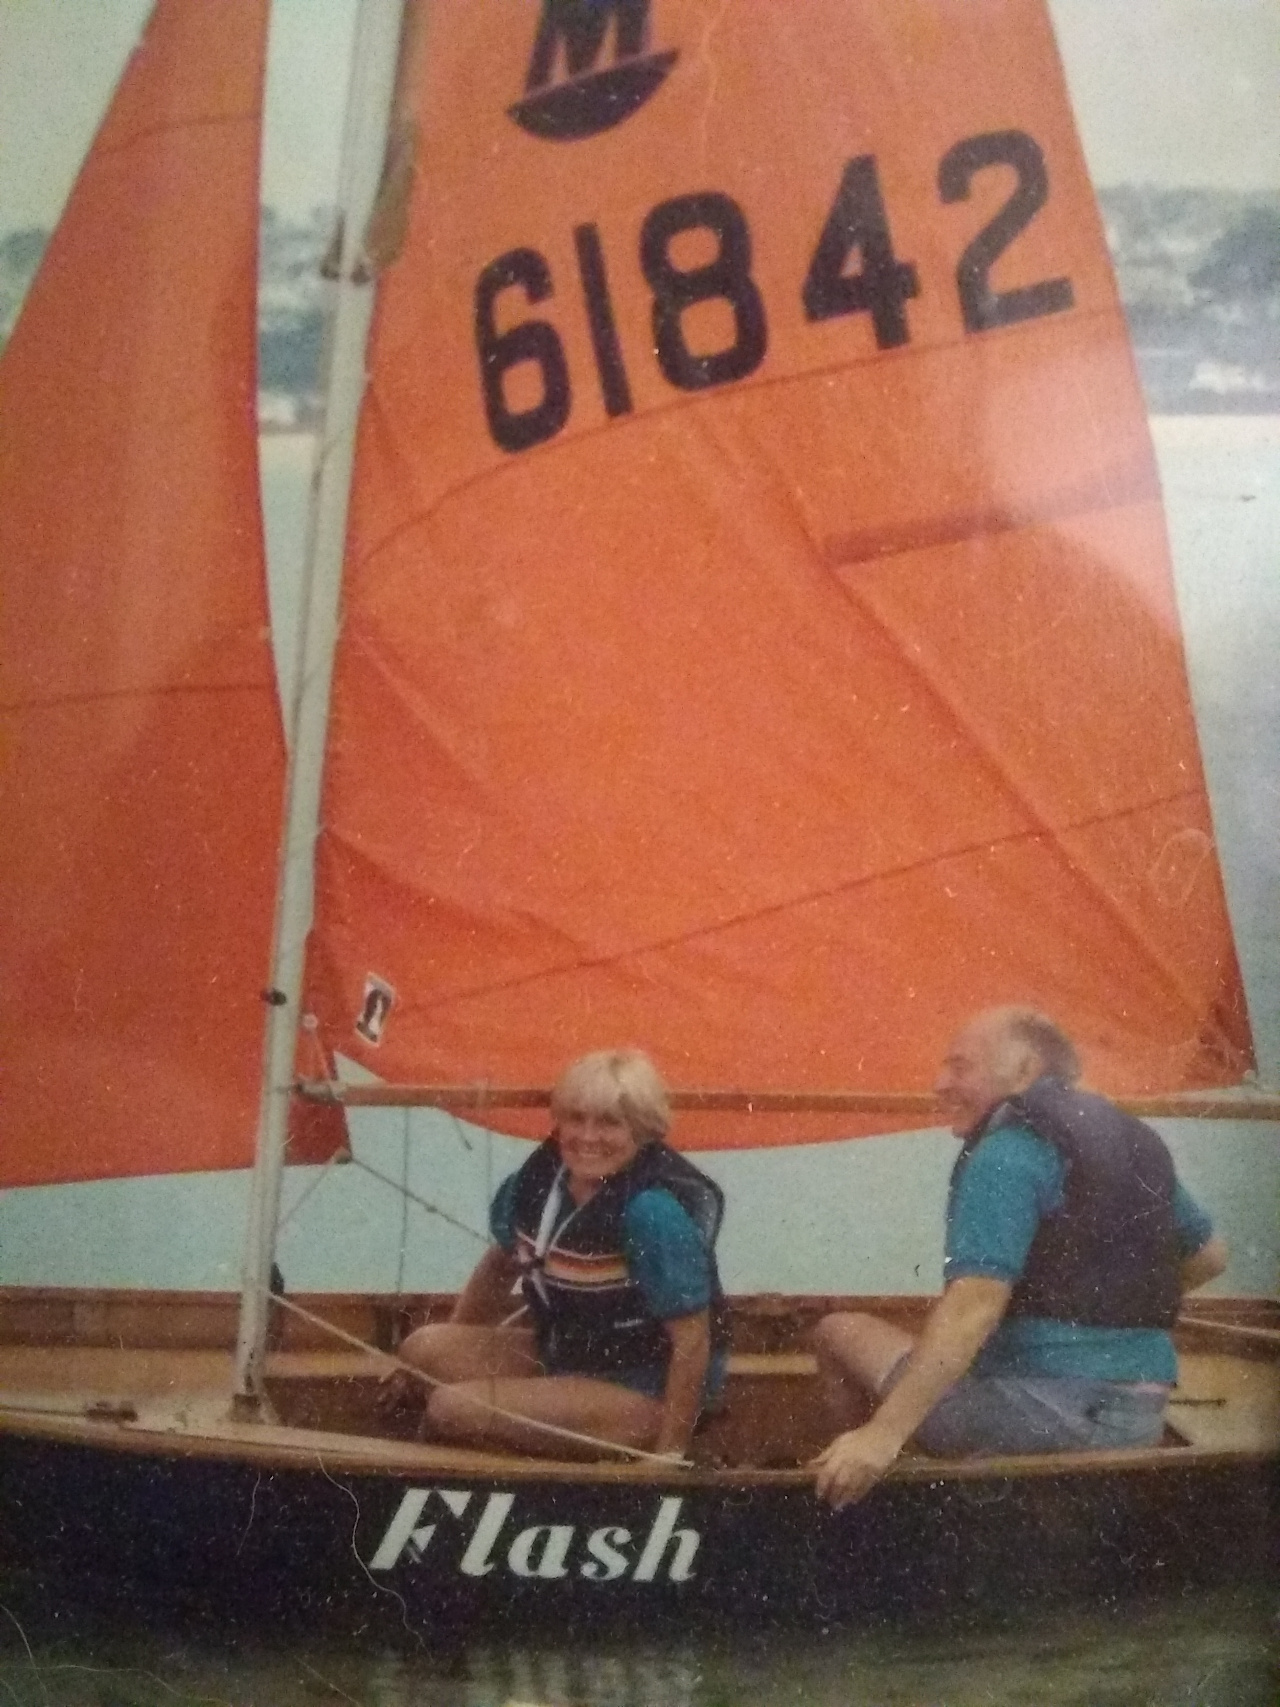 A Mirror dinghy being sailed by two adults in a harbour